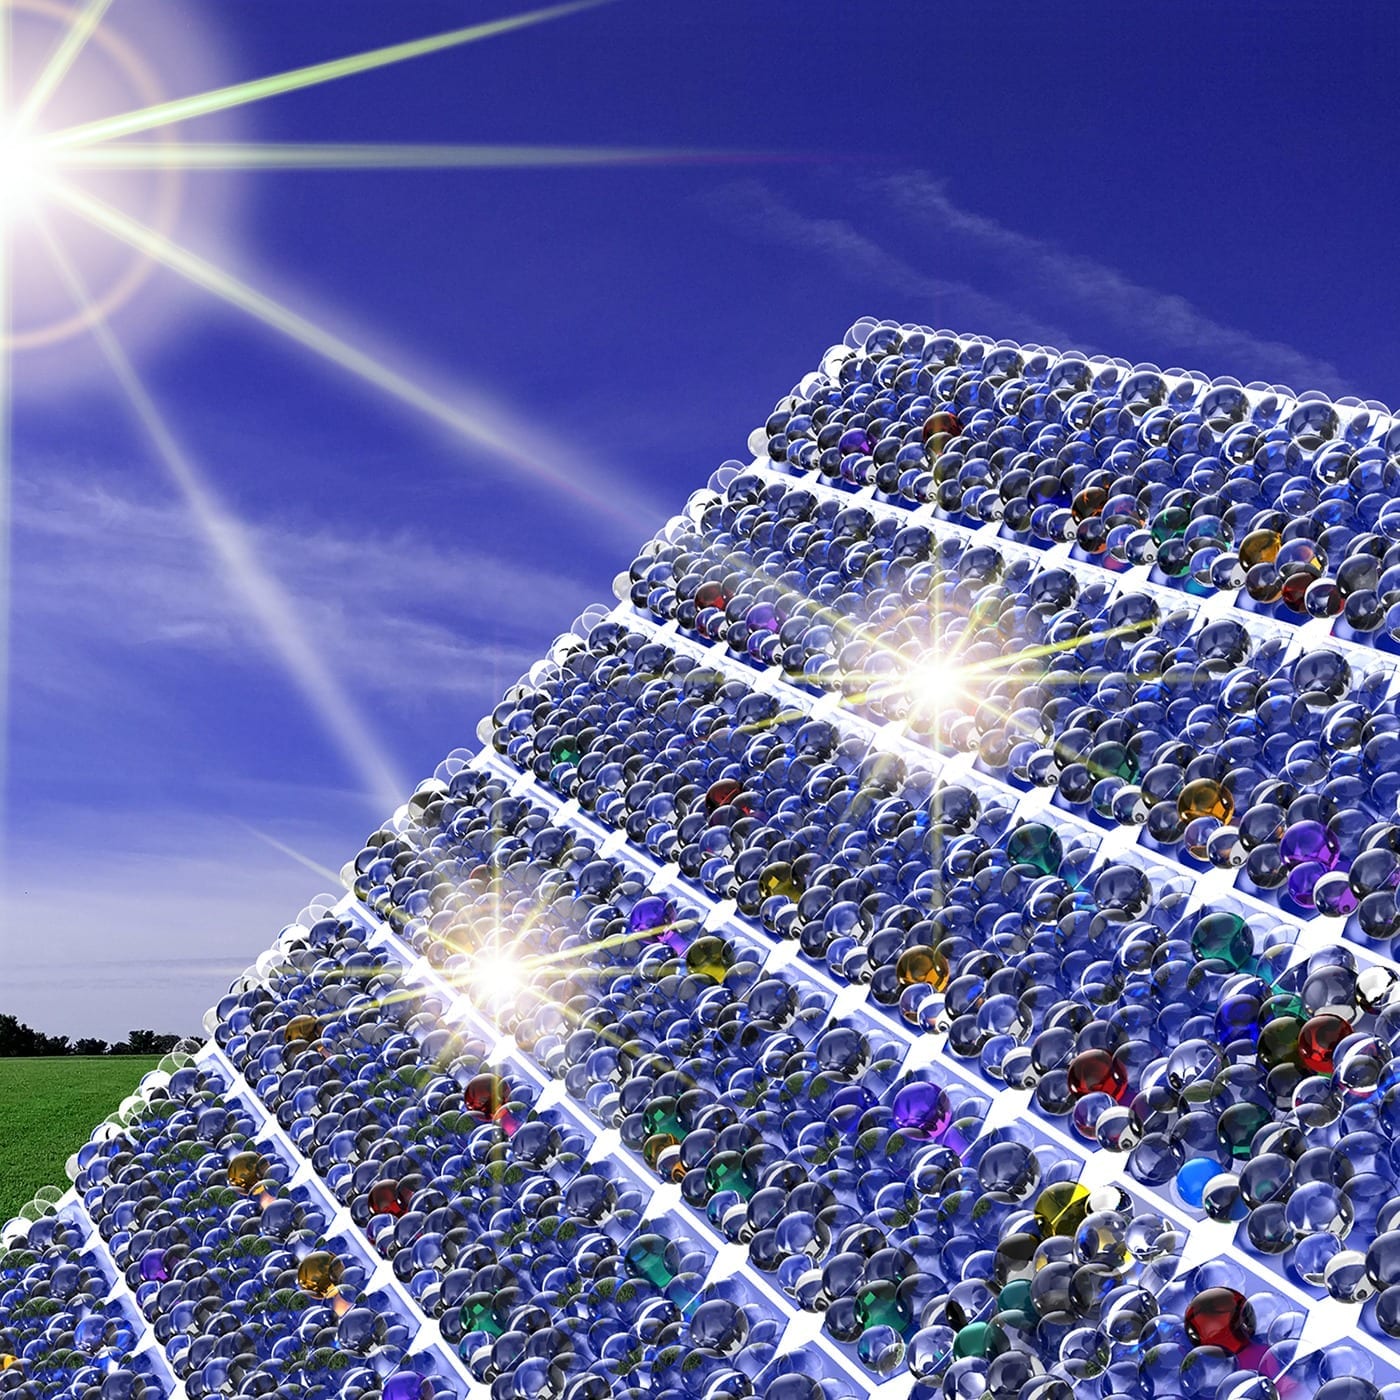 Nanocoating enhances solar cell efficiency by 20 percent